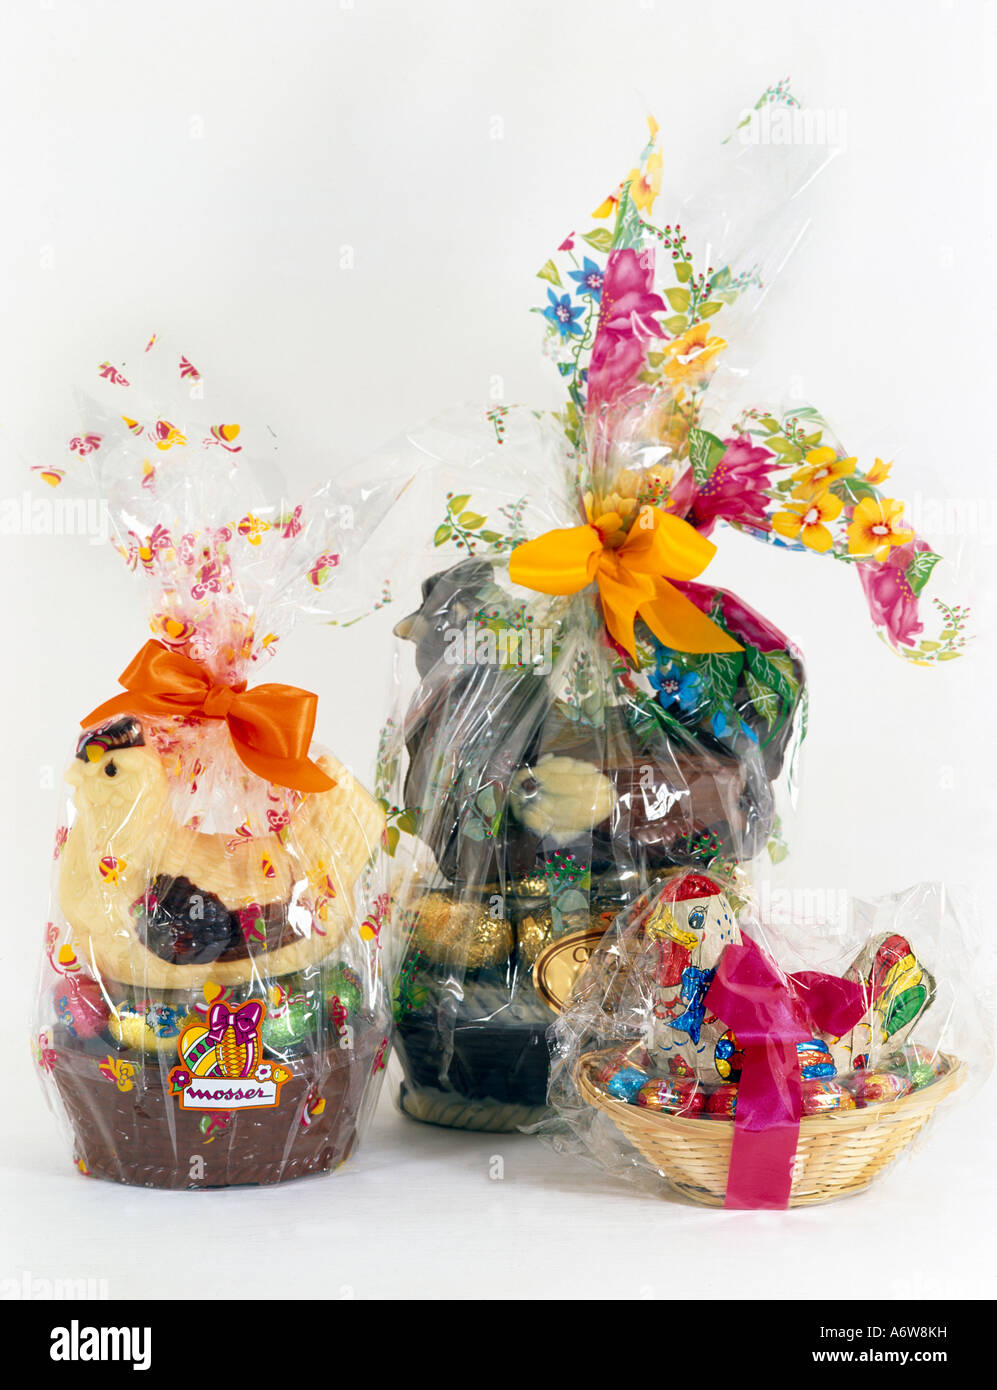 Chocolate Easter Eggs With Chocolate Hens In Baskets & Chocolate Bunny Stock Photo